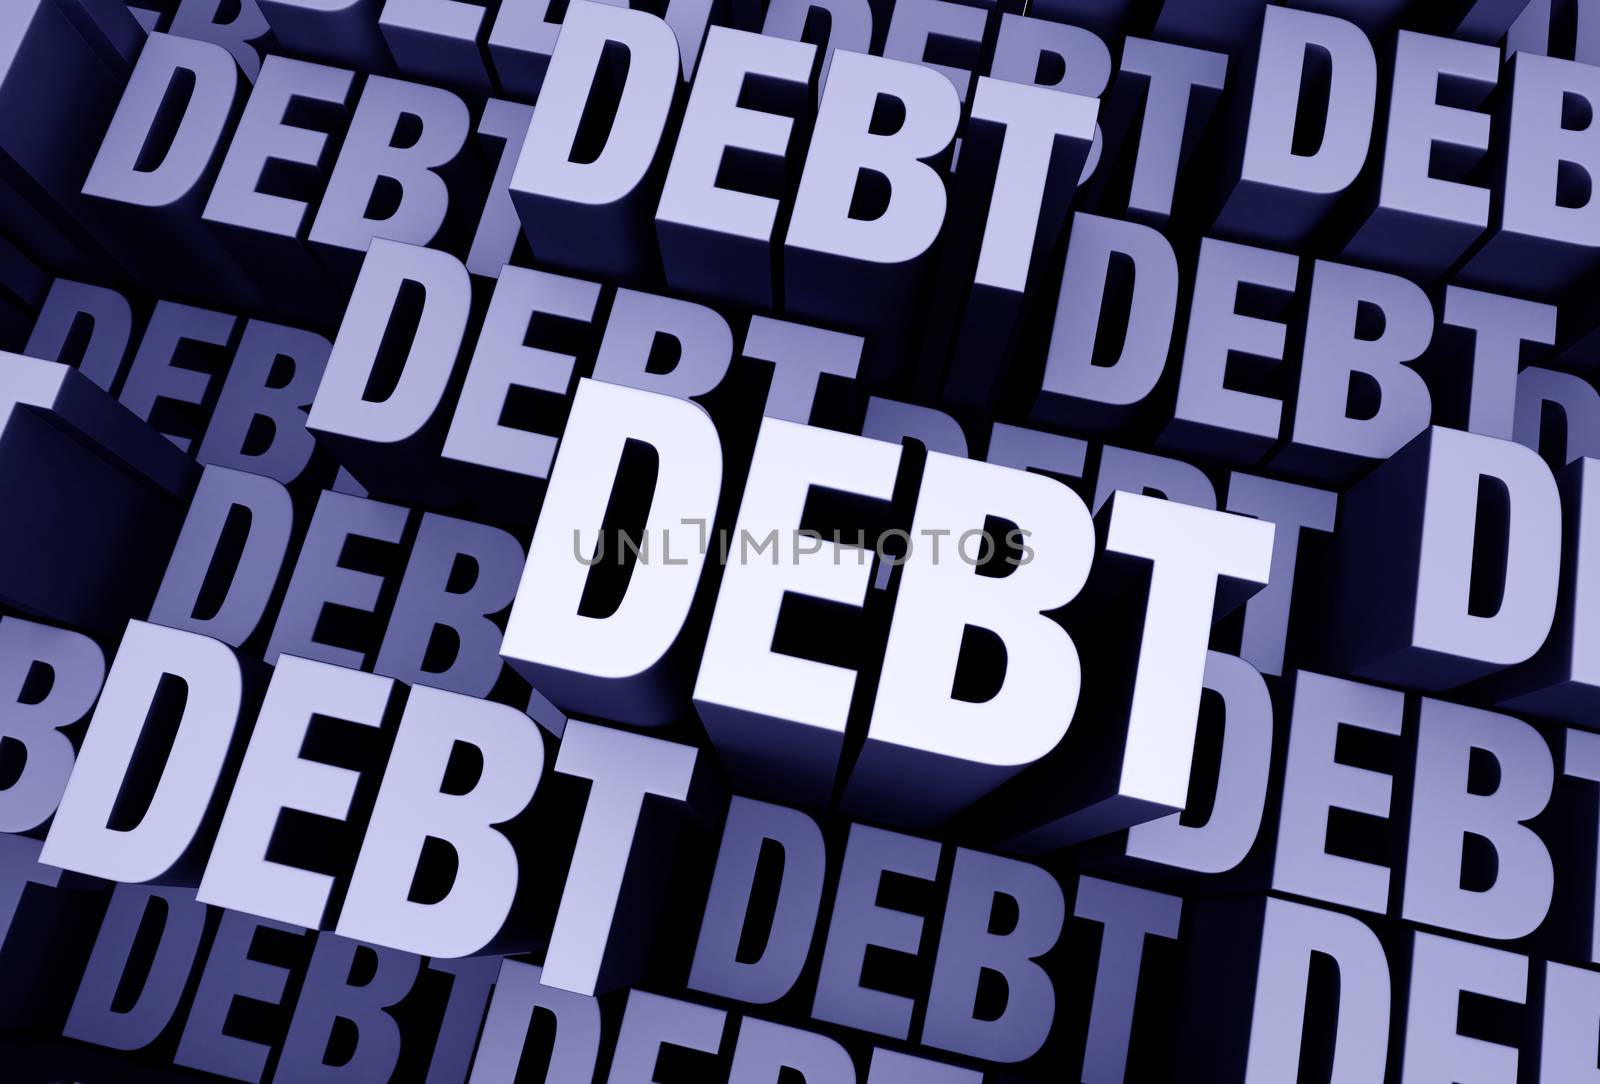 A 3D blue gray background filled with the word "DEBT" repeated many times a different depths.